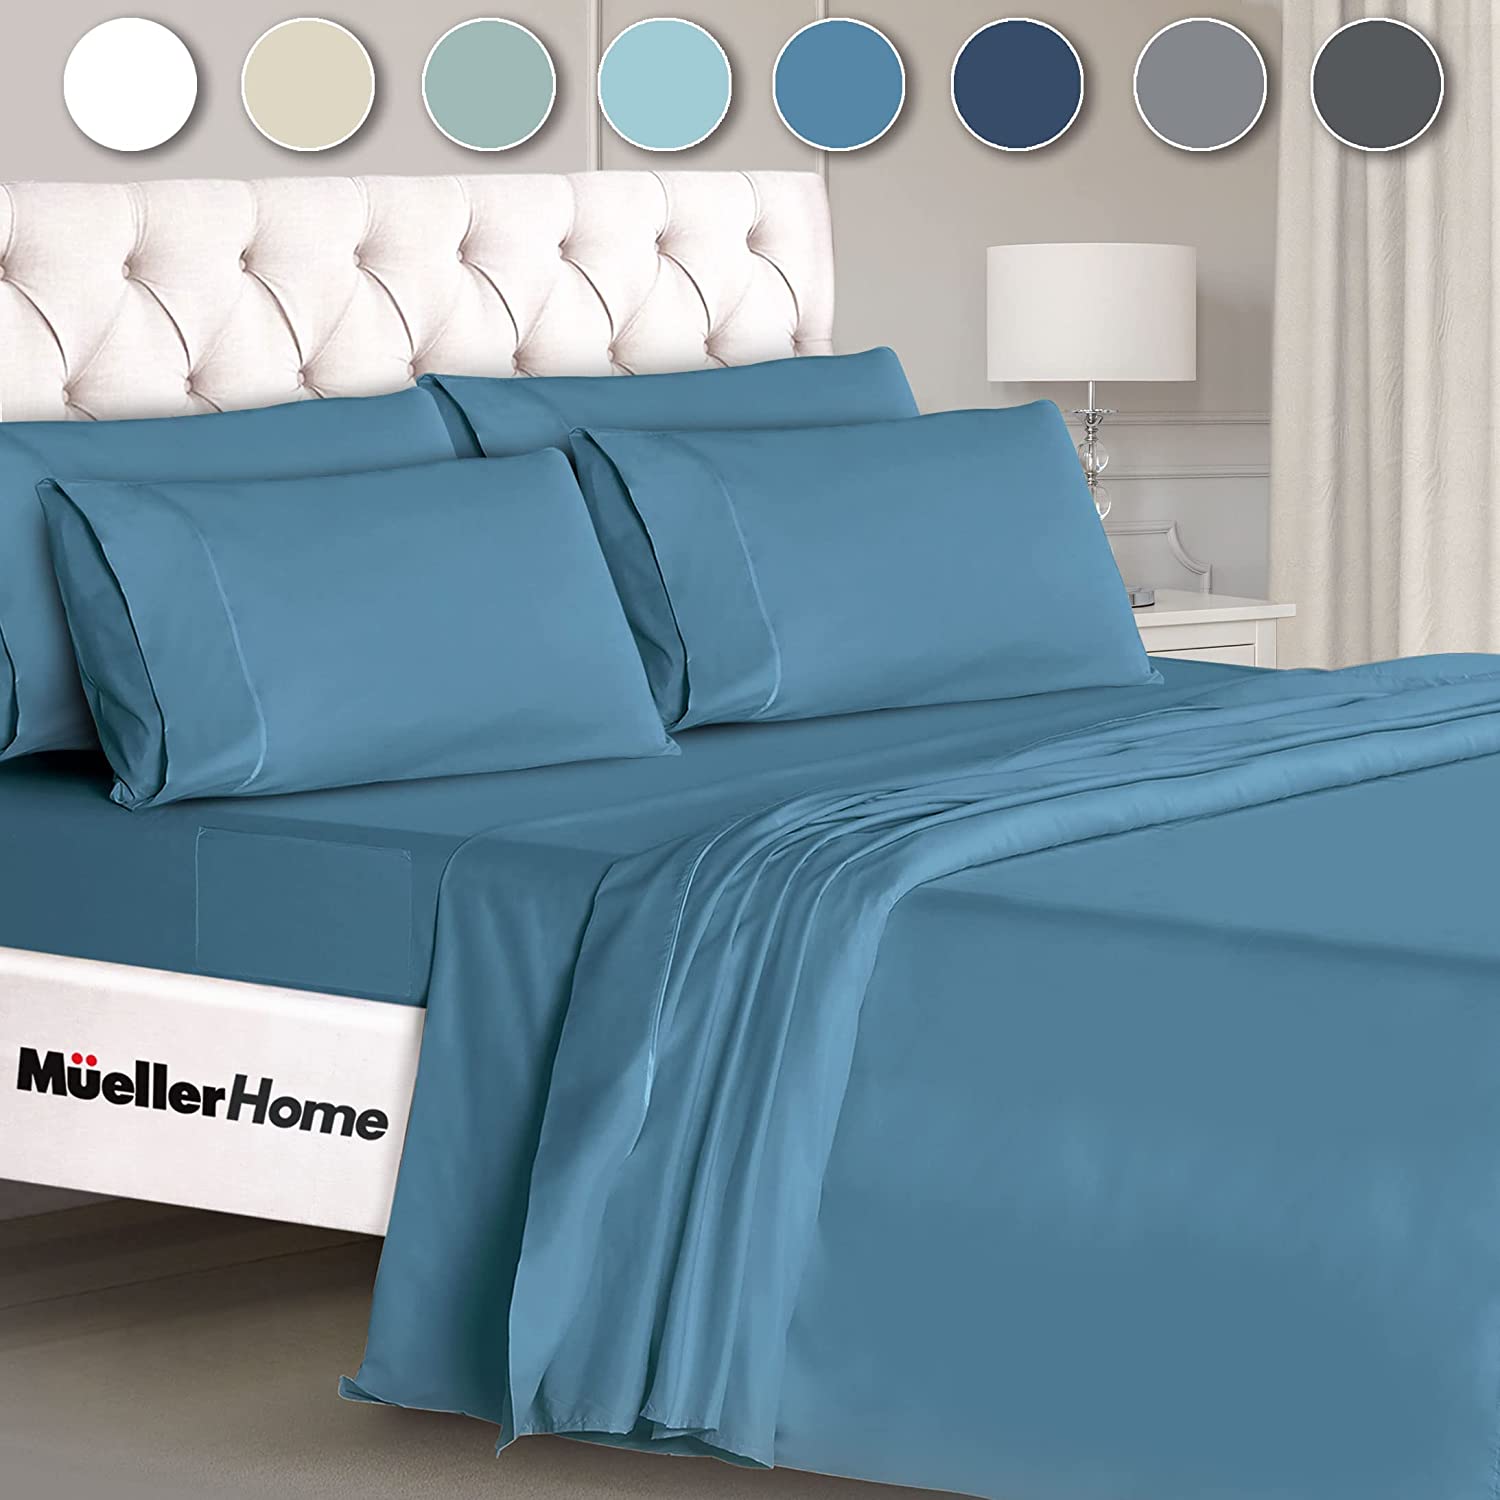 mullere-home_premium-hotel-collection-6-piece-king-sheet-set